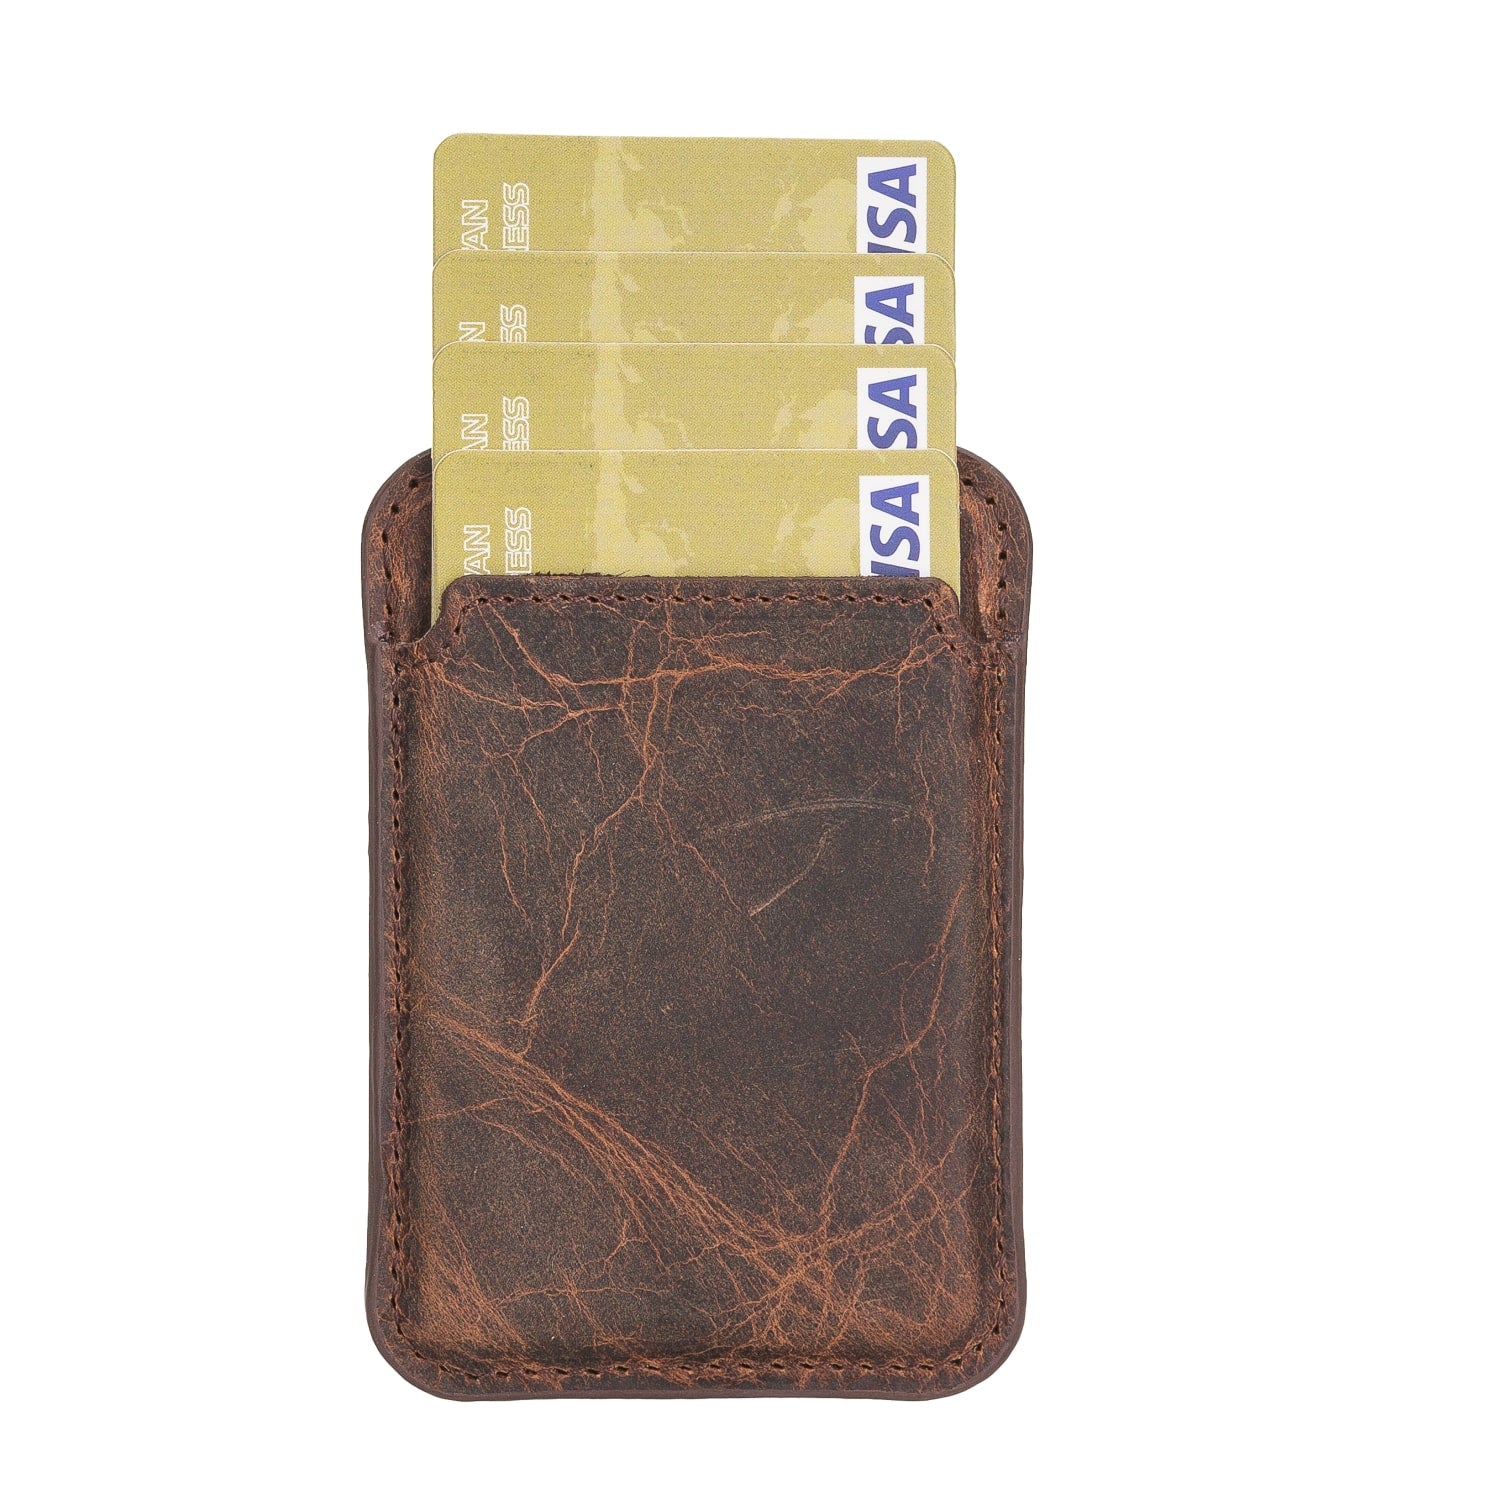 Tan Brown Leather Apple MagSafe Card Holder Magnetic Wallet for iPhone - Bomonti - 2